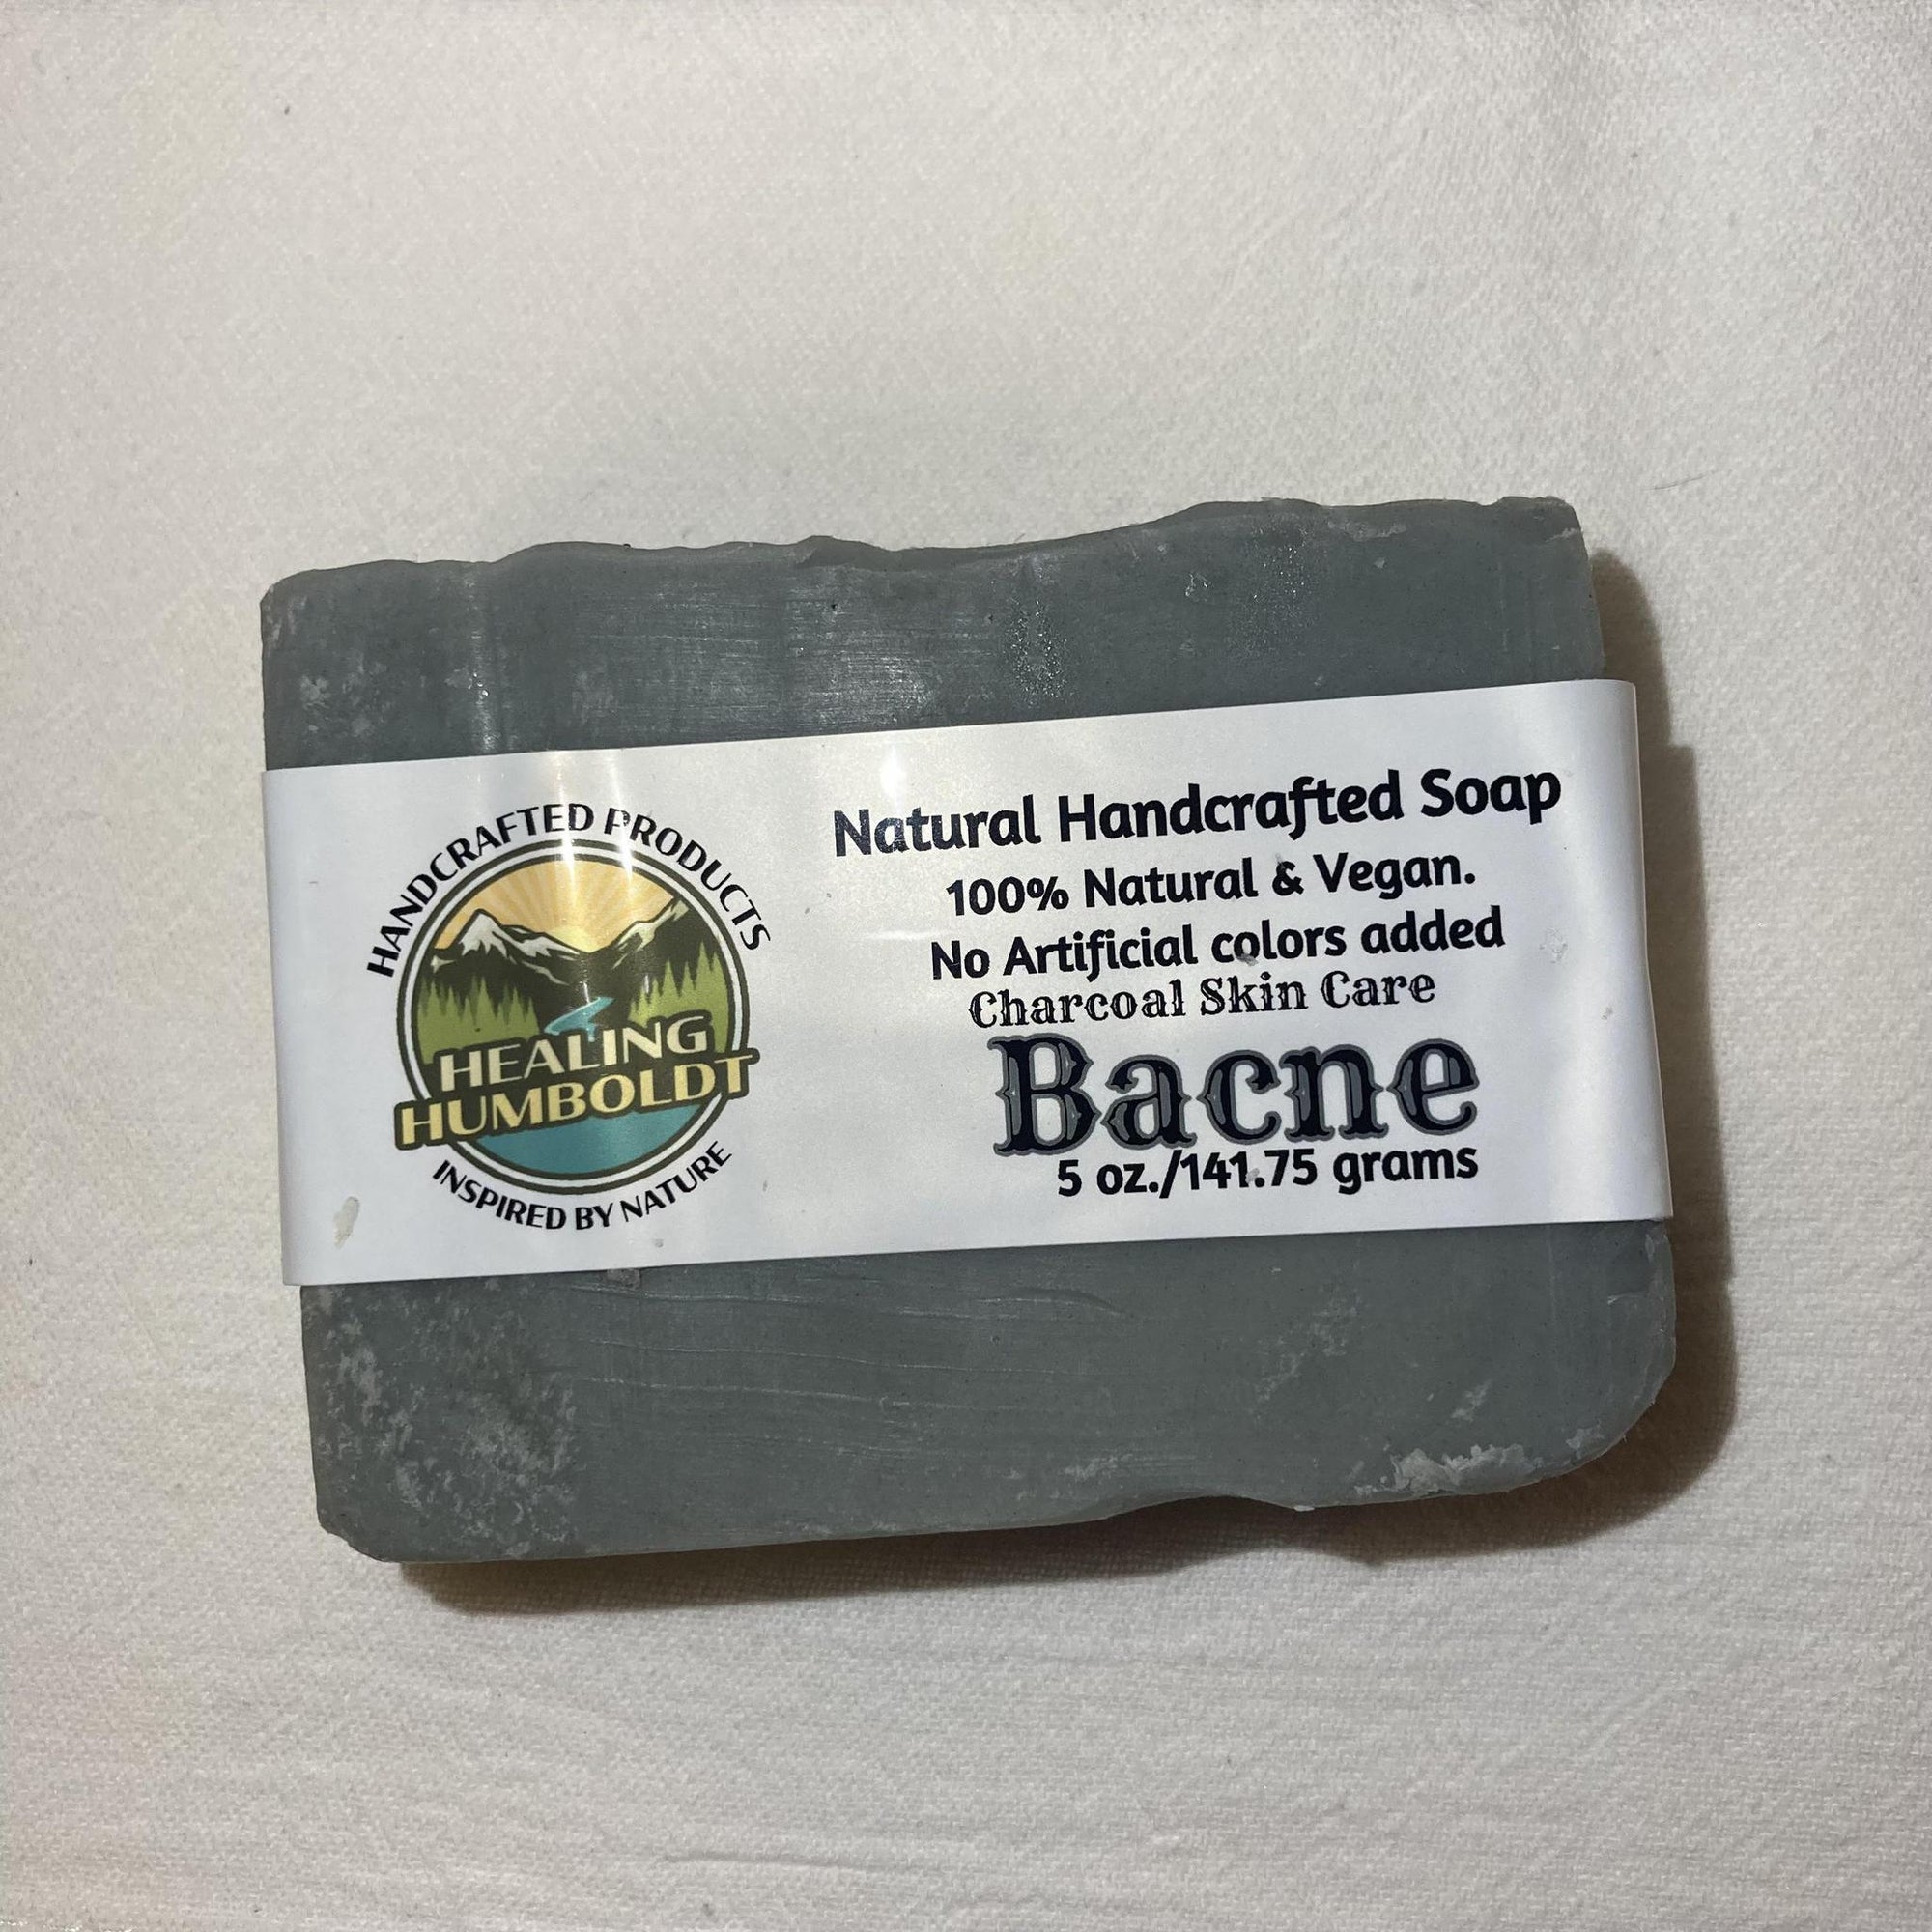 Healing Humboldt Handcrafted Soap | Charcoal Skin Care for Bacne